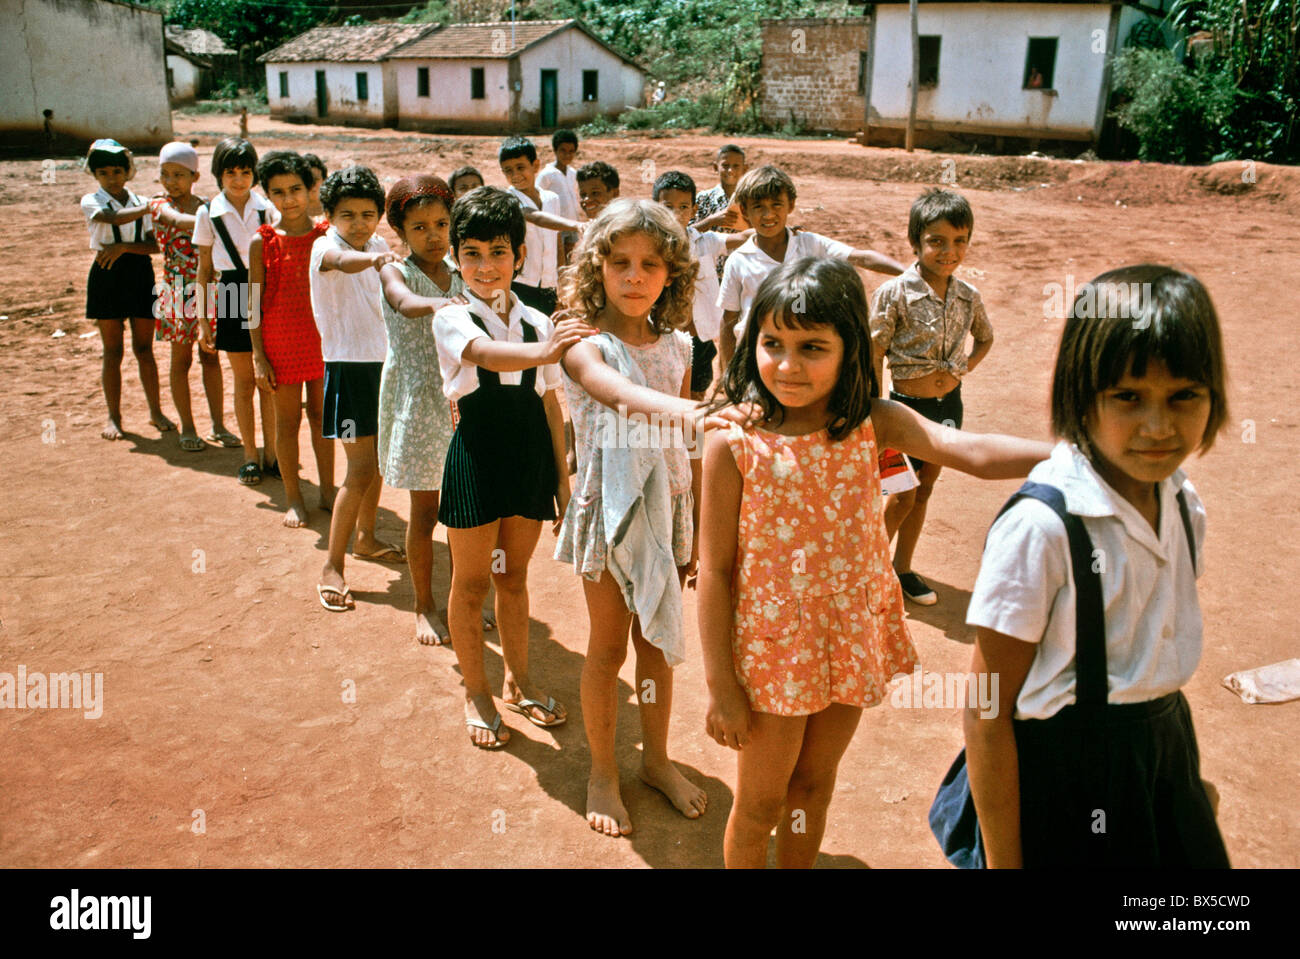 Schoolchildren line up at recess in a rural Brazilian village in Bahia province. Note uniforms on some students. Stock Photo